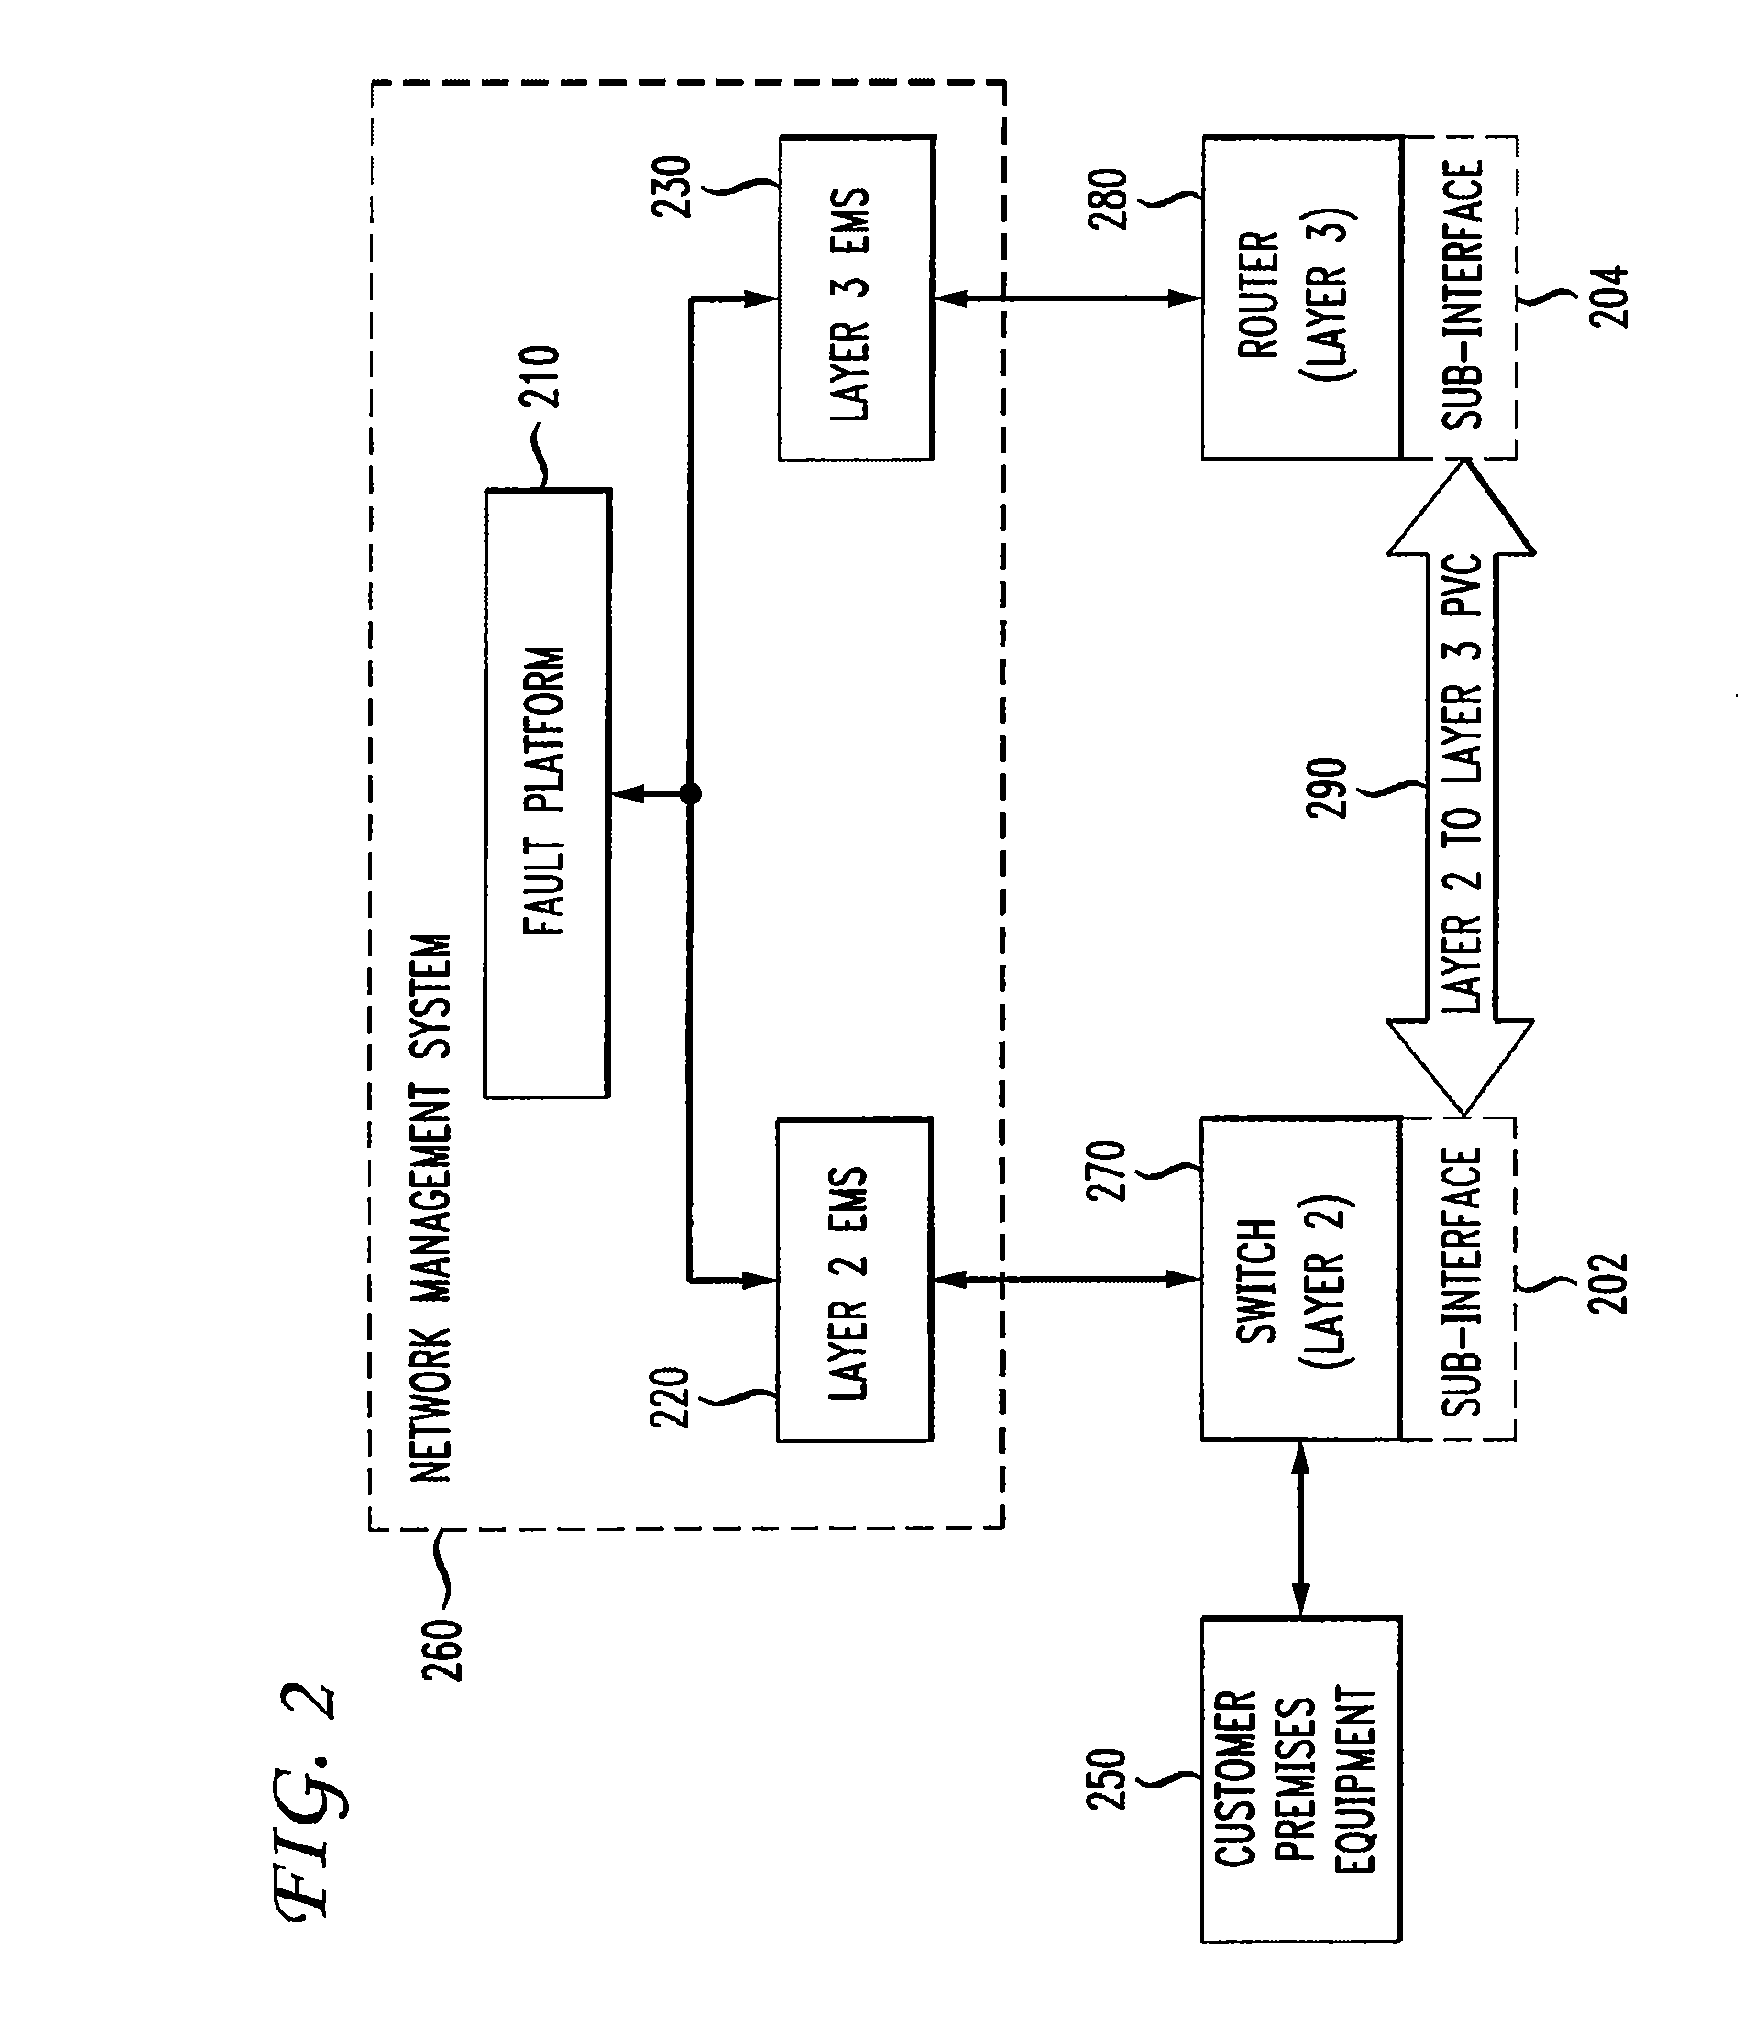 Automatic problem isolation for multi-layer network failures